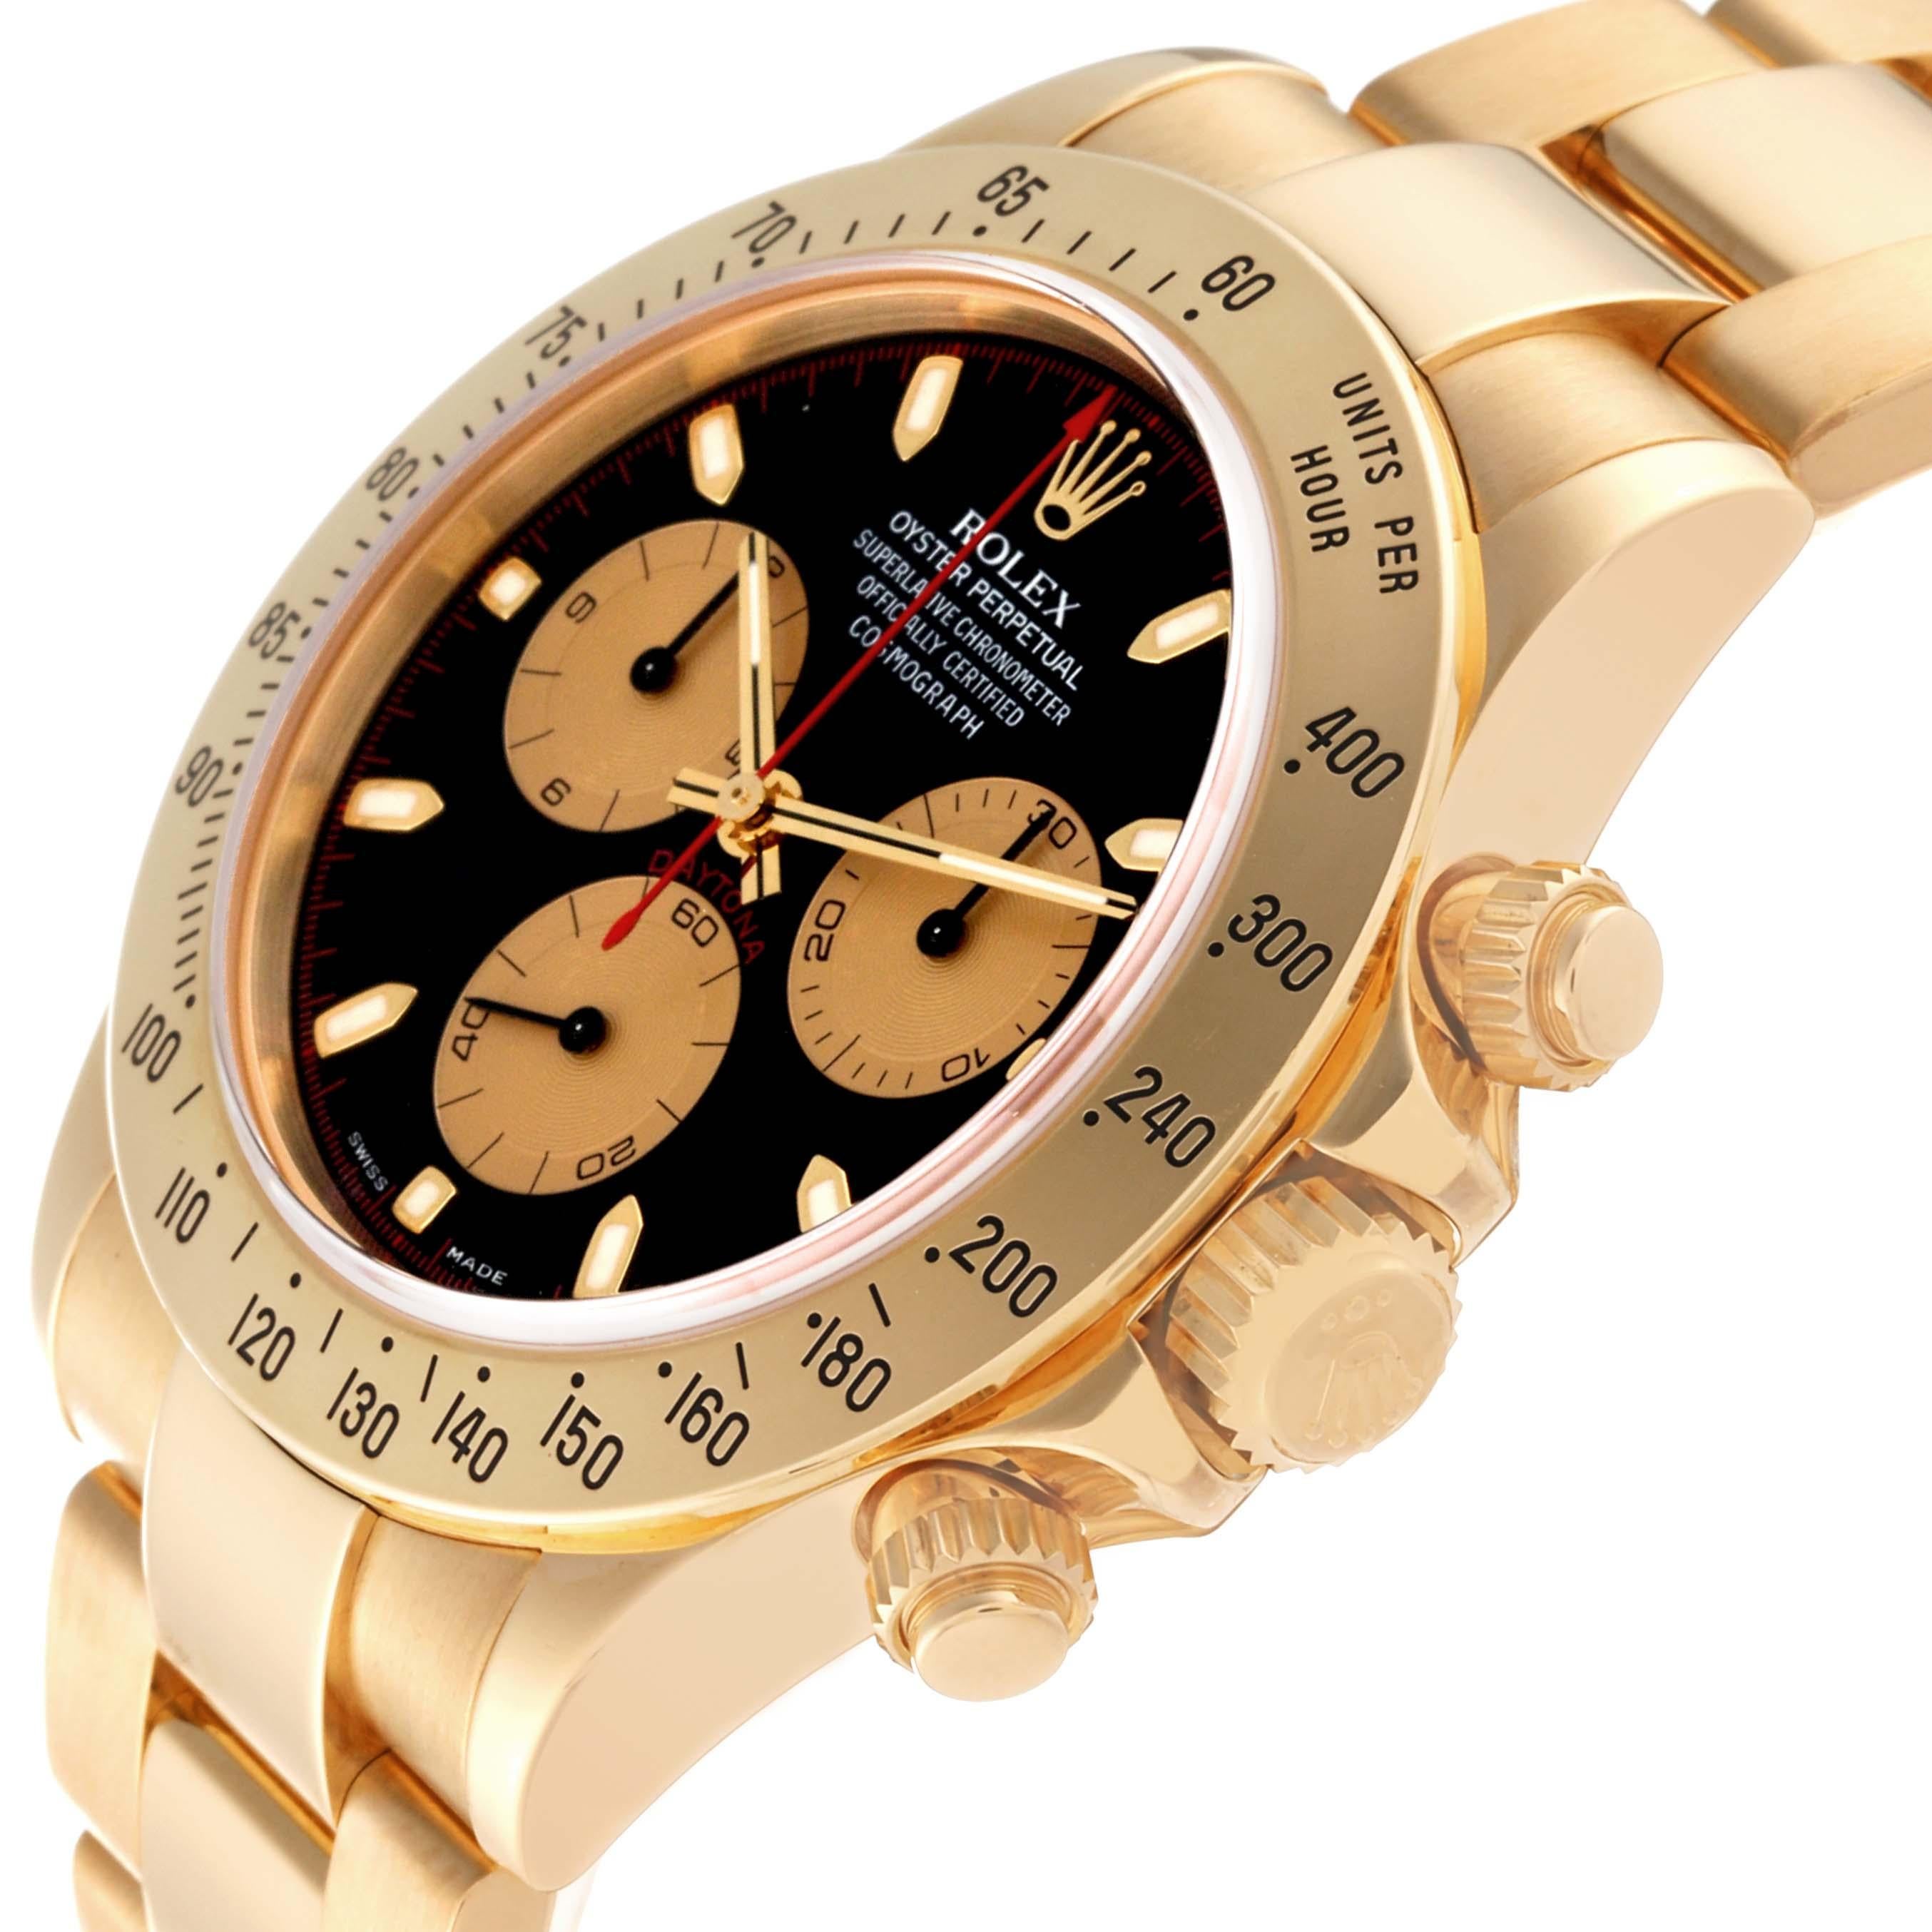 Rolex Cosmograph Daytona Yellow Gold Black Dial Mens Watch 116528 In Excellent Condition For Sale In Atlanta, GA